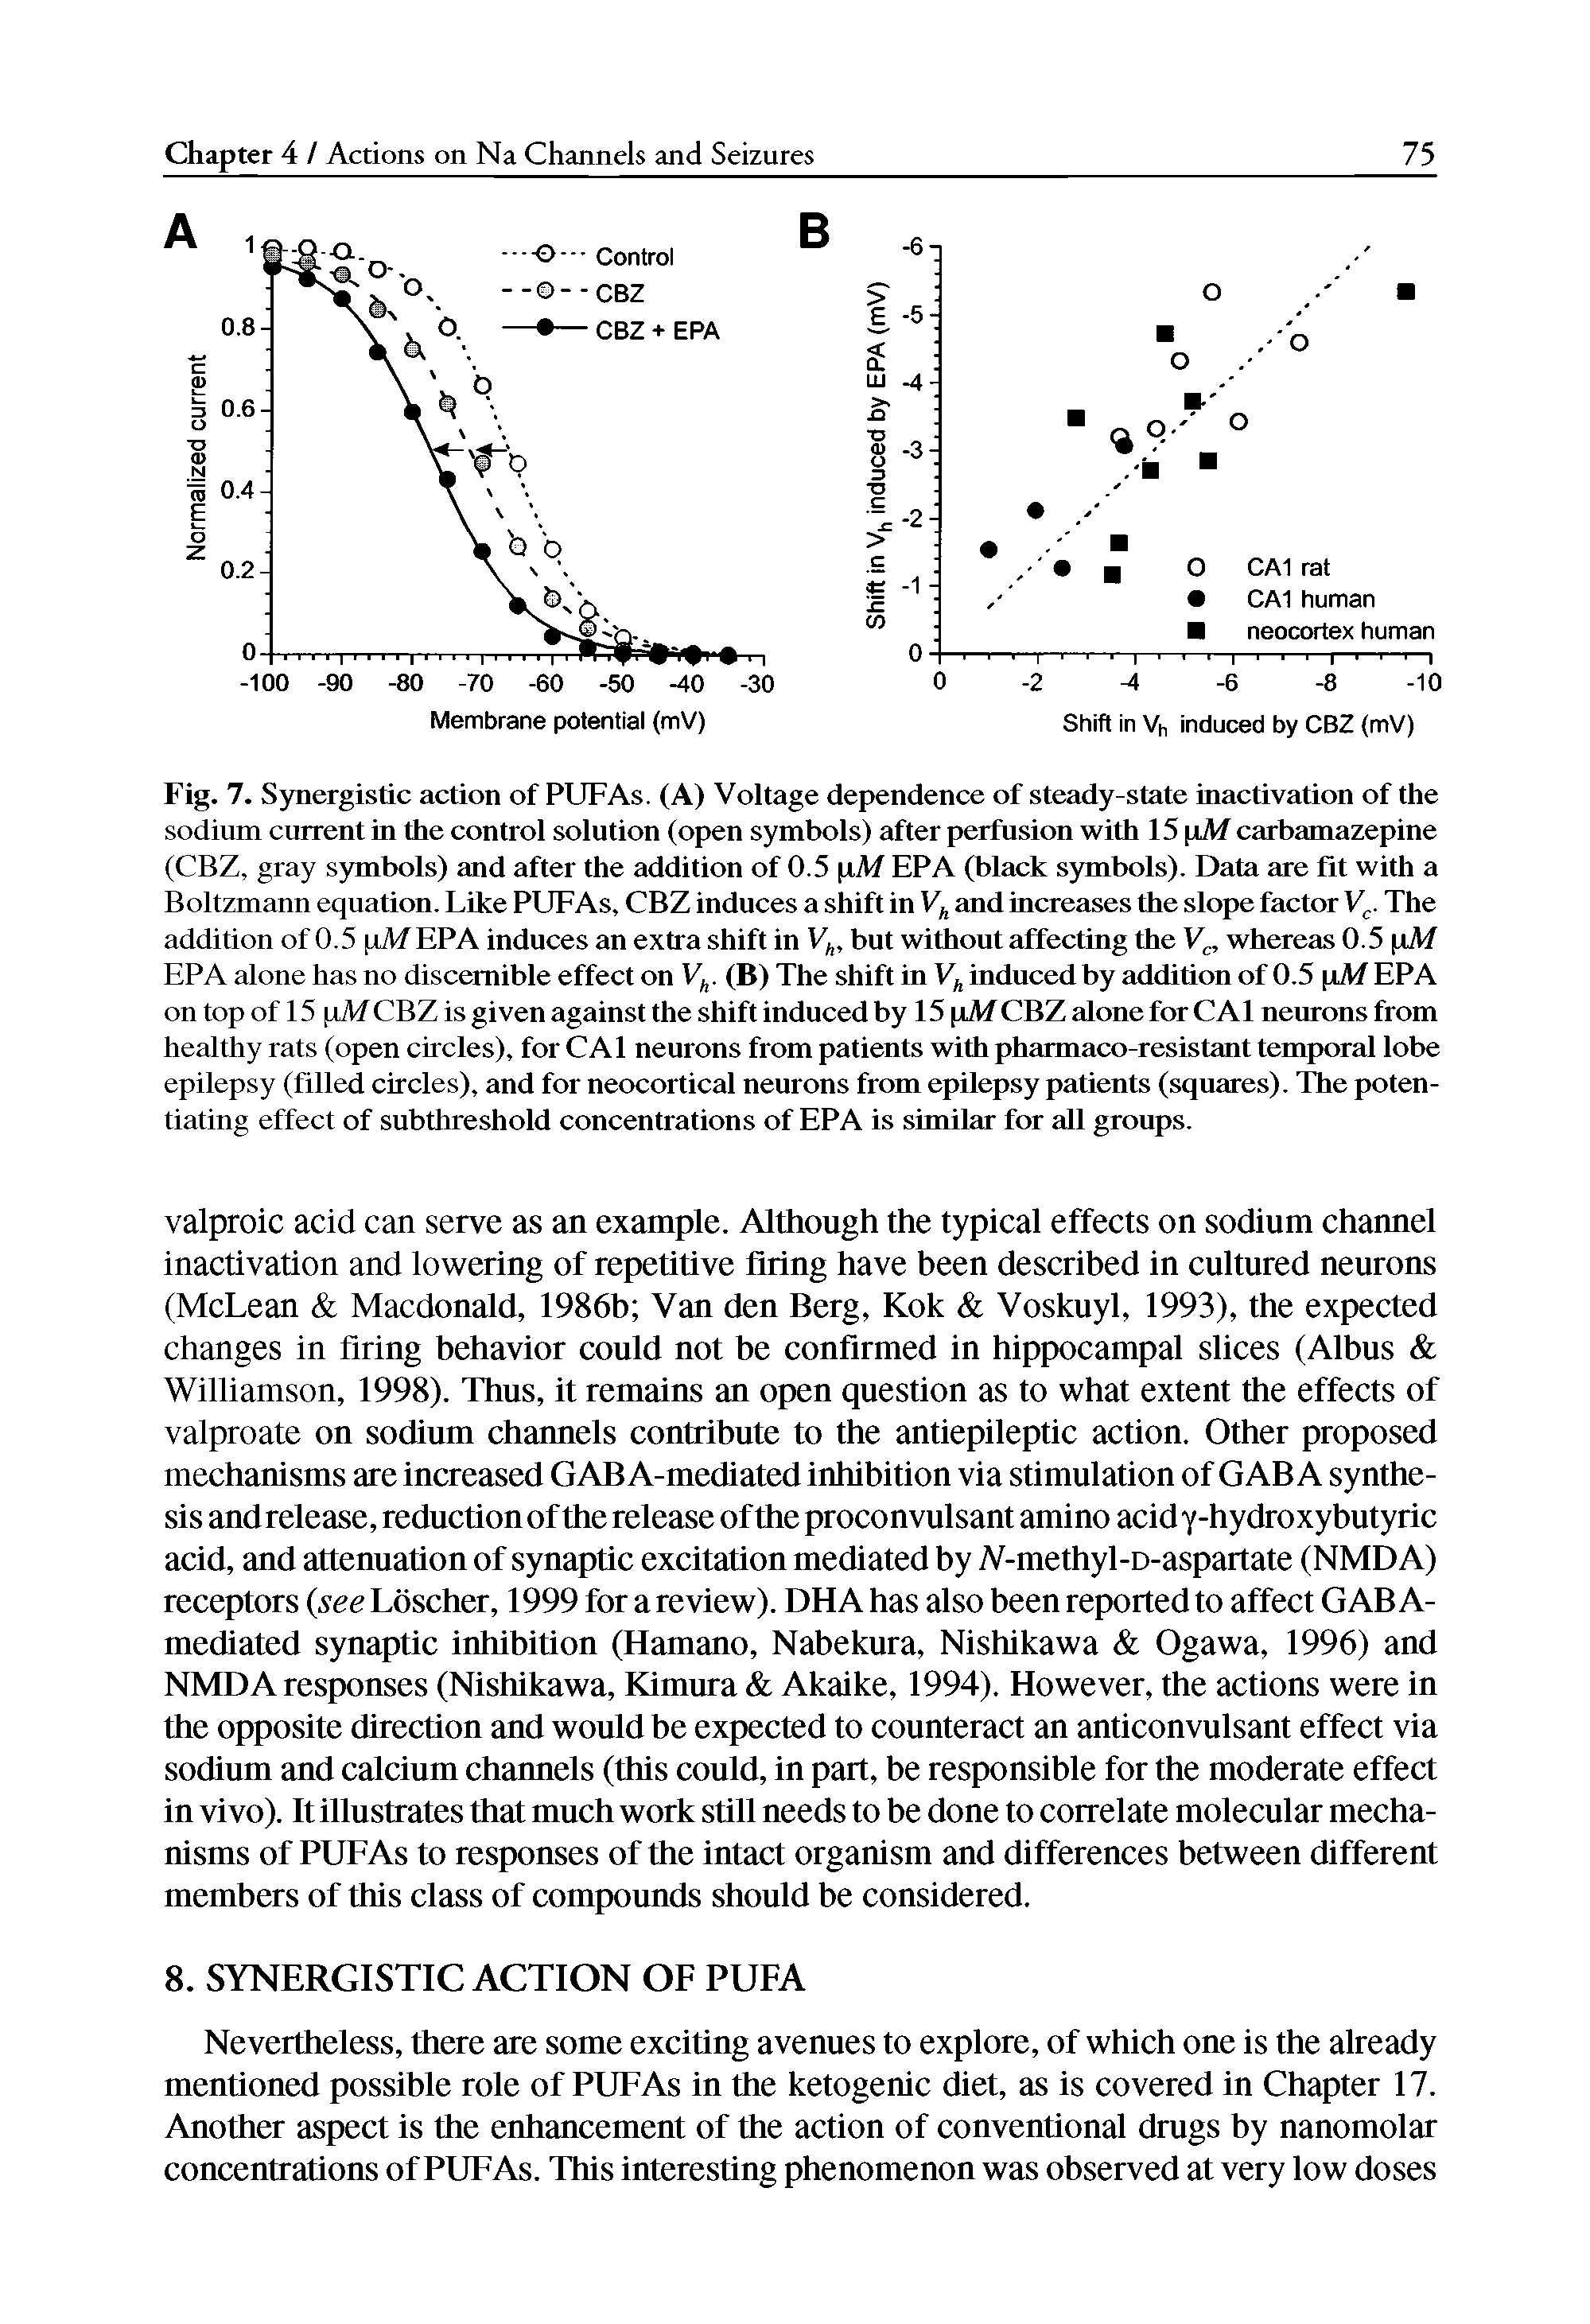 Fig. 7. Synergistic action of PUFAs. (A) Voltage dependence of steady-state inactivation of the sodium current in the control solution (open symbols) after perfusion with 15 pAf carbamazepine (CBZ, gray symbols) and after the addition of 0.5 pAf EPA (black symbols). Data are fit with a Boltzmann equation. Like PUFAs, CBZ induces a shift in I4 and increases the slope factor V. The addition of 0.5 fiM EPA induces an extra shift in V), but without affecting the V, whereas 0.5 pAf EPA alone has no discernible effect on V. (B) The shift in induced by addition of 0.5 pAf EPA on top of 15 [iM CBZ is given against the shift induced by 15 pAf CBZ alone for CAl neurons from healthy rats (open circles), for CAl neurons from patients with pharmaco-resistant temporal lobe epilepsy (filled circles), and for neocortical neurons from epilepsy patients (squares). The potentiating effect of subthreshold concentrations of EPA is similar for all groups.